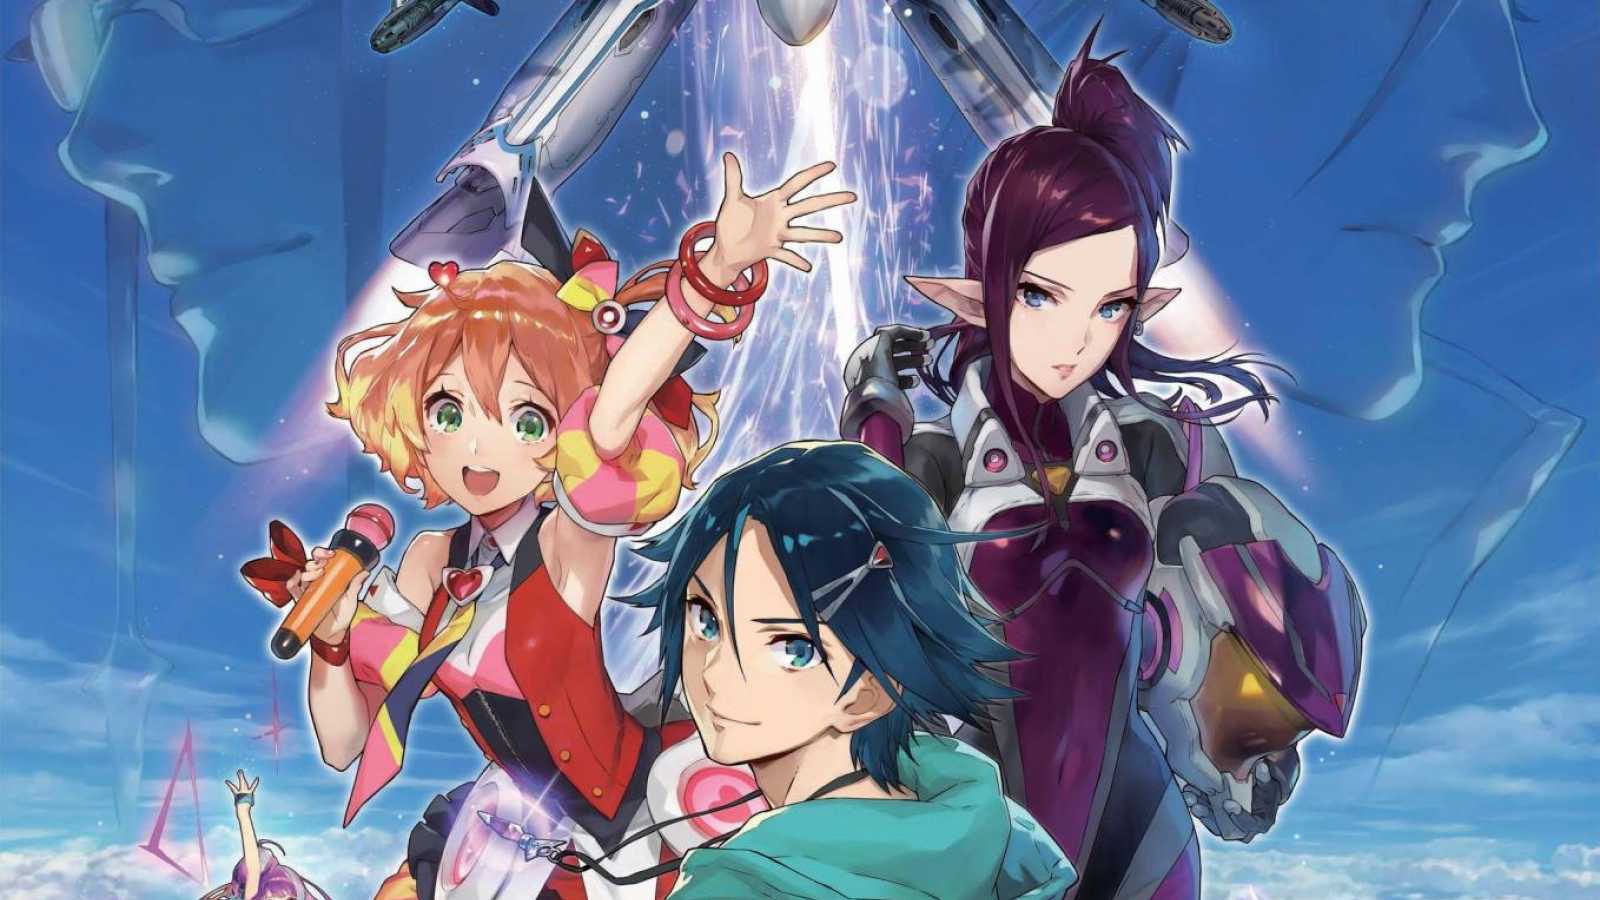 Music from Macross Series Added to Streaming Services © BIGWEST/MACROSS DELTA PROJECT